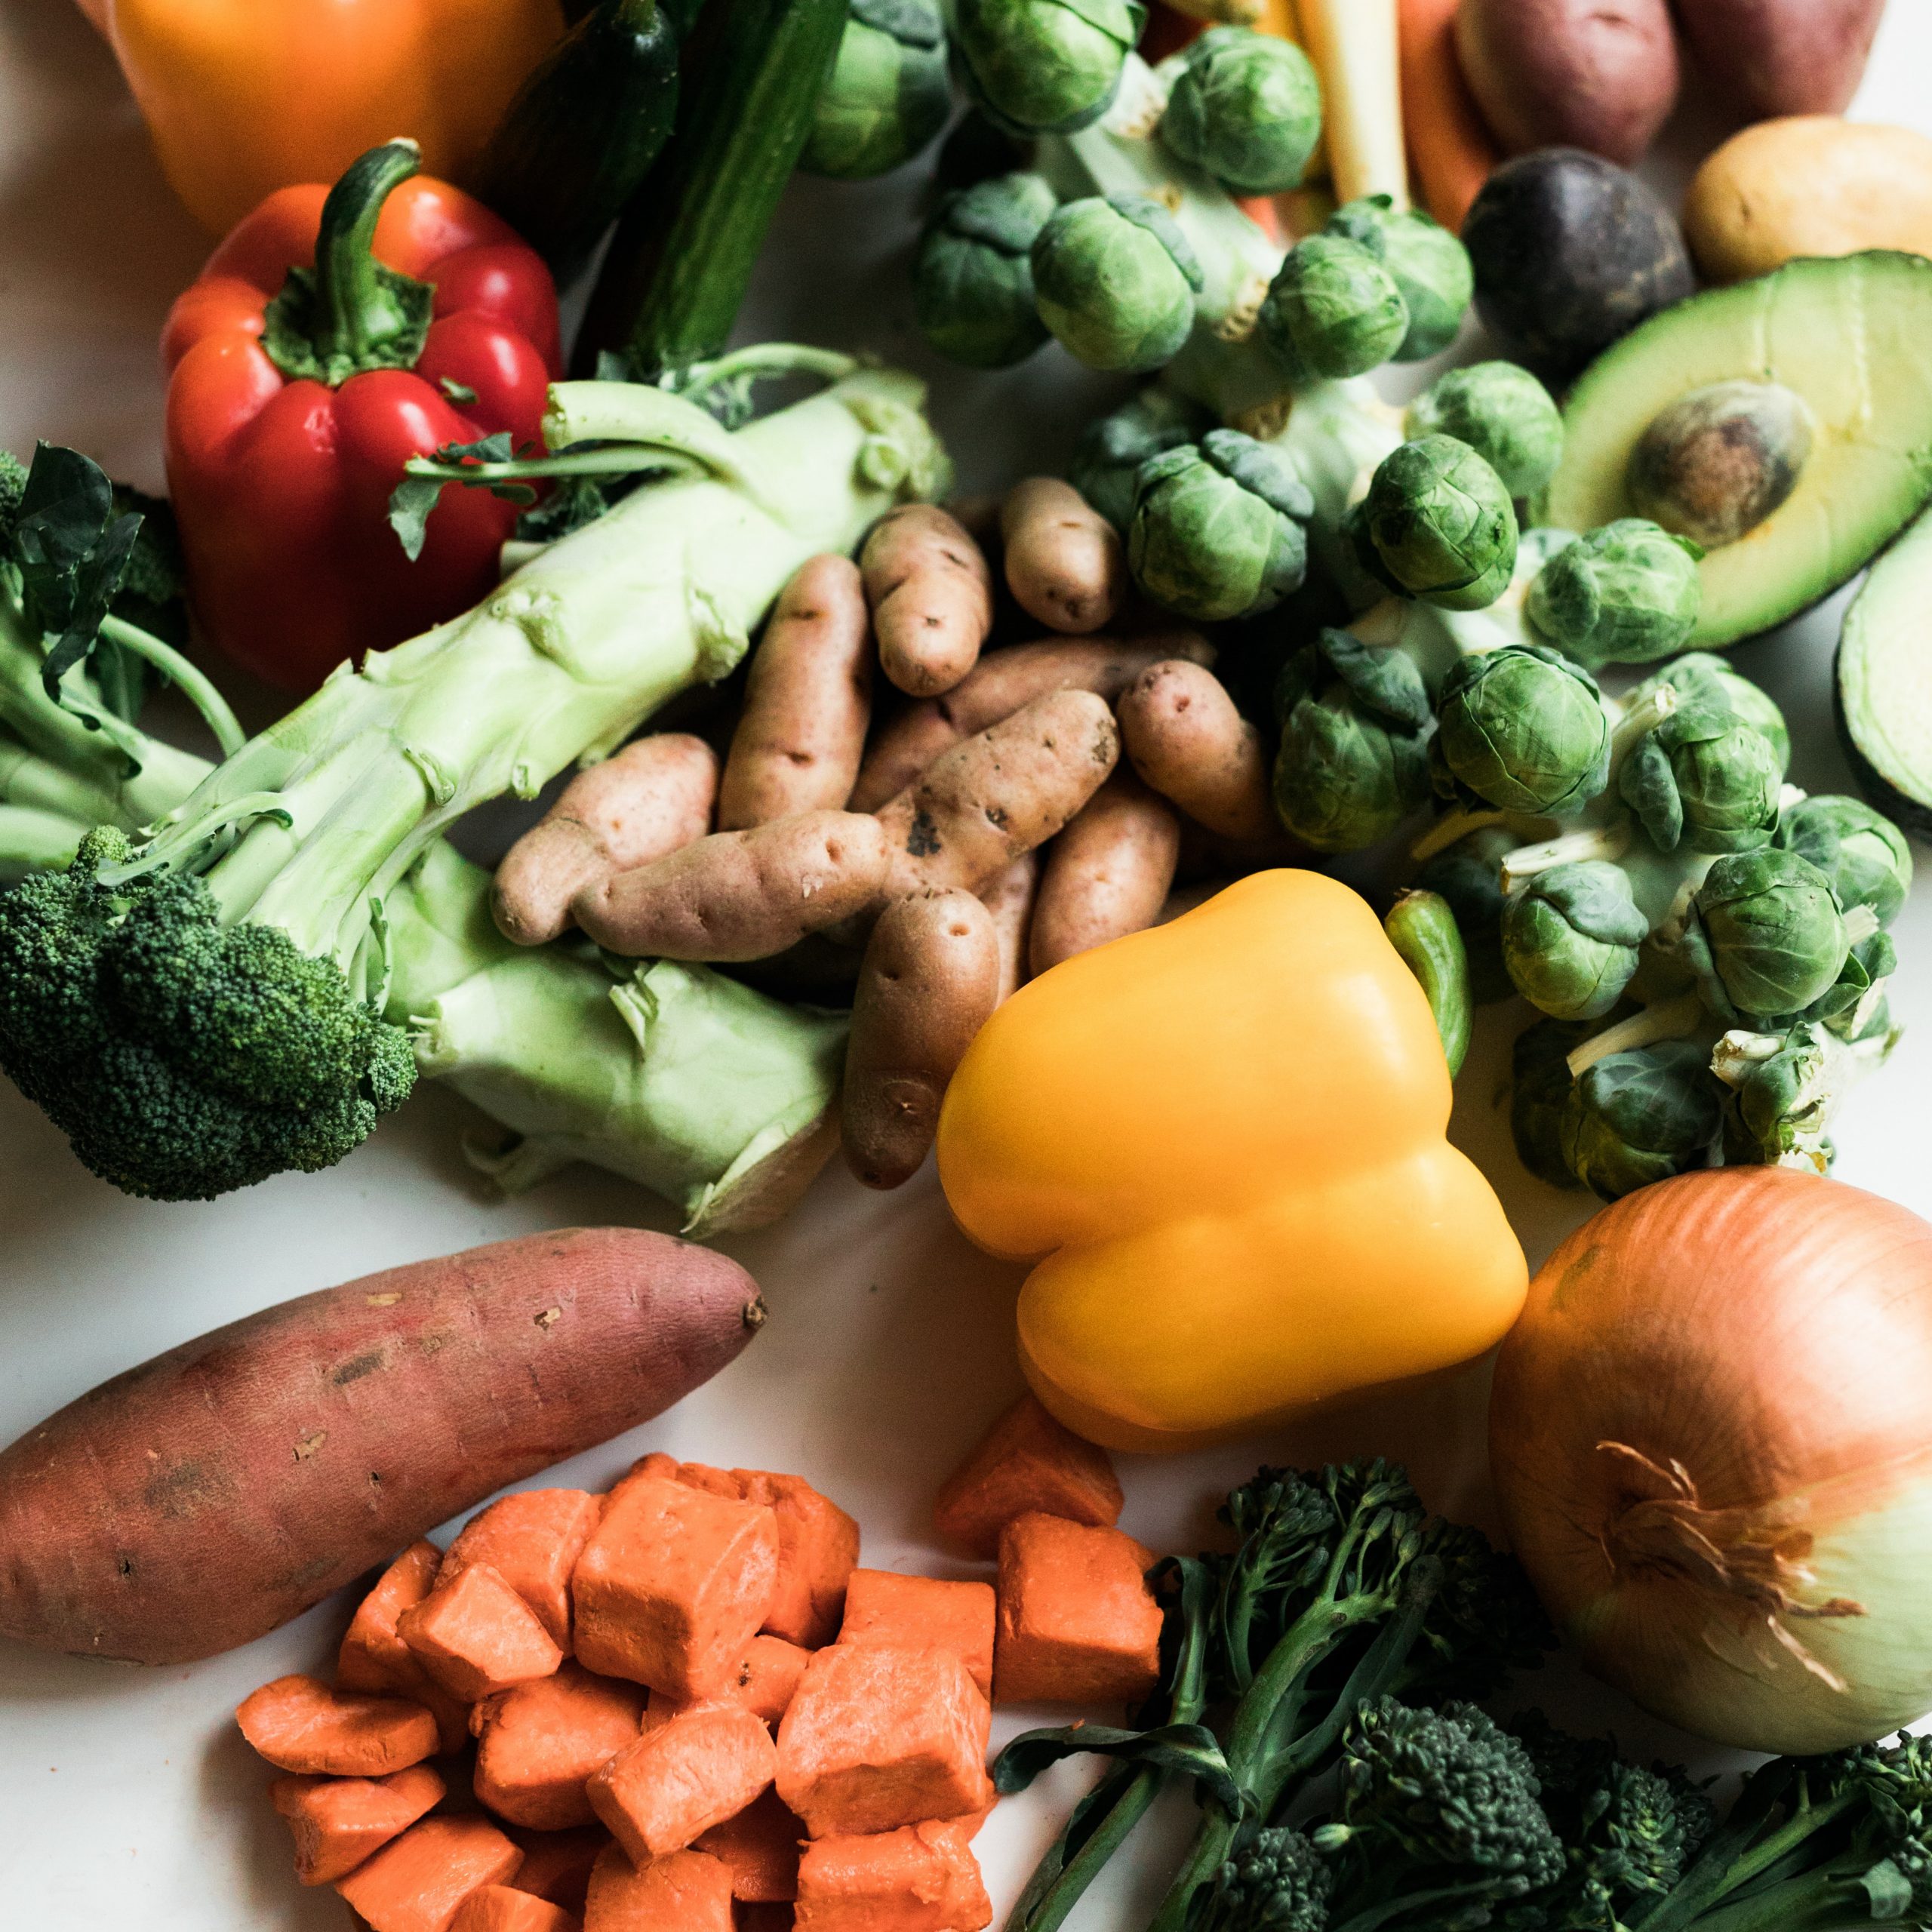 Female Personal Trainer La Jolla, assortment of vegetables we recommend as our nutrition plan